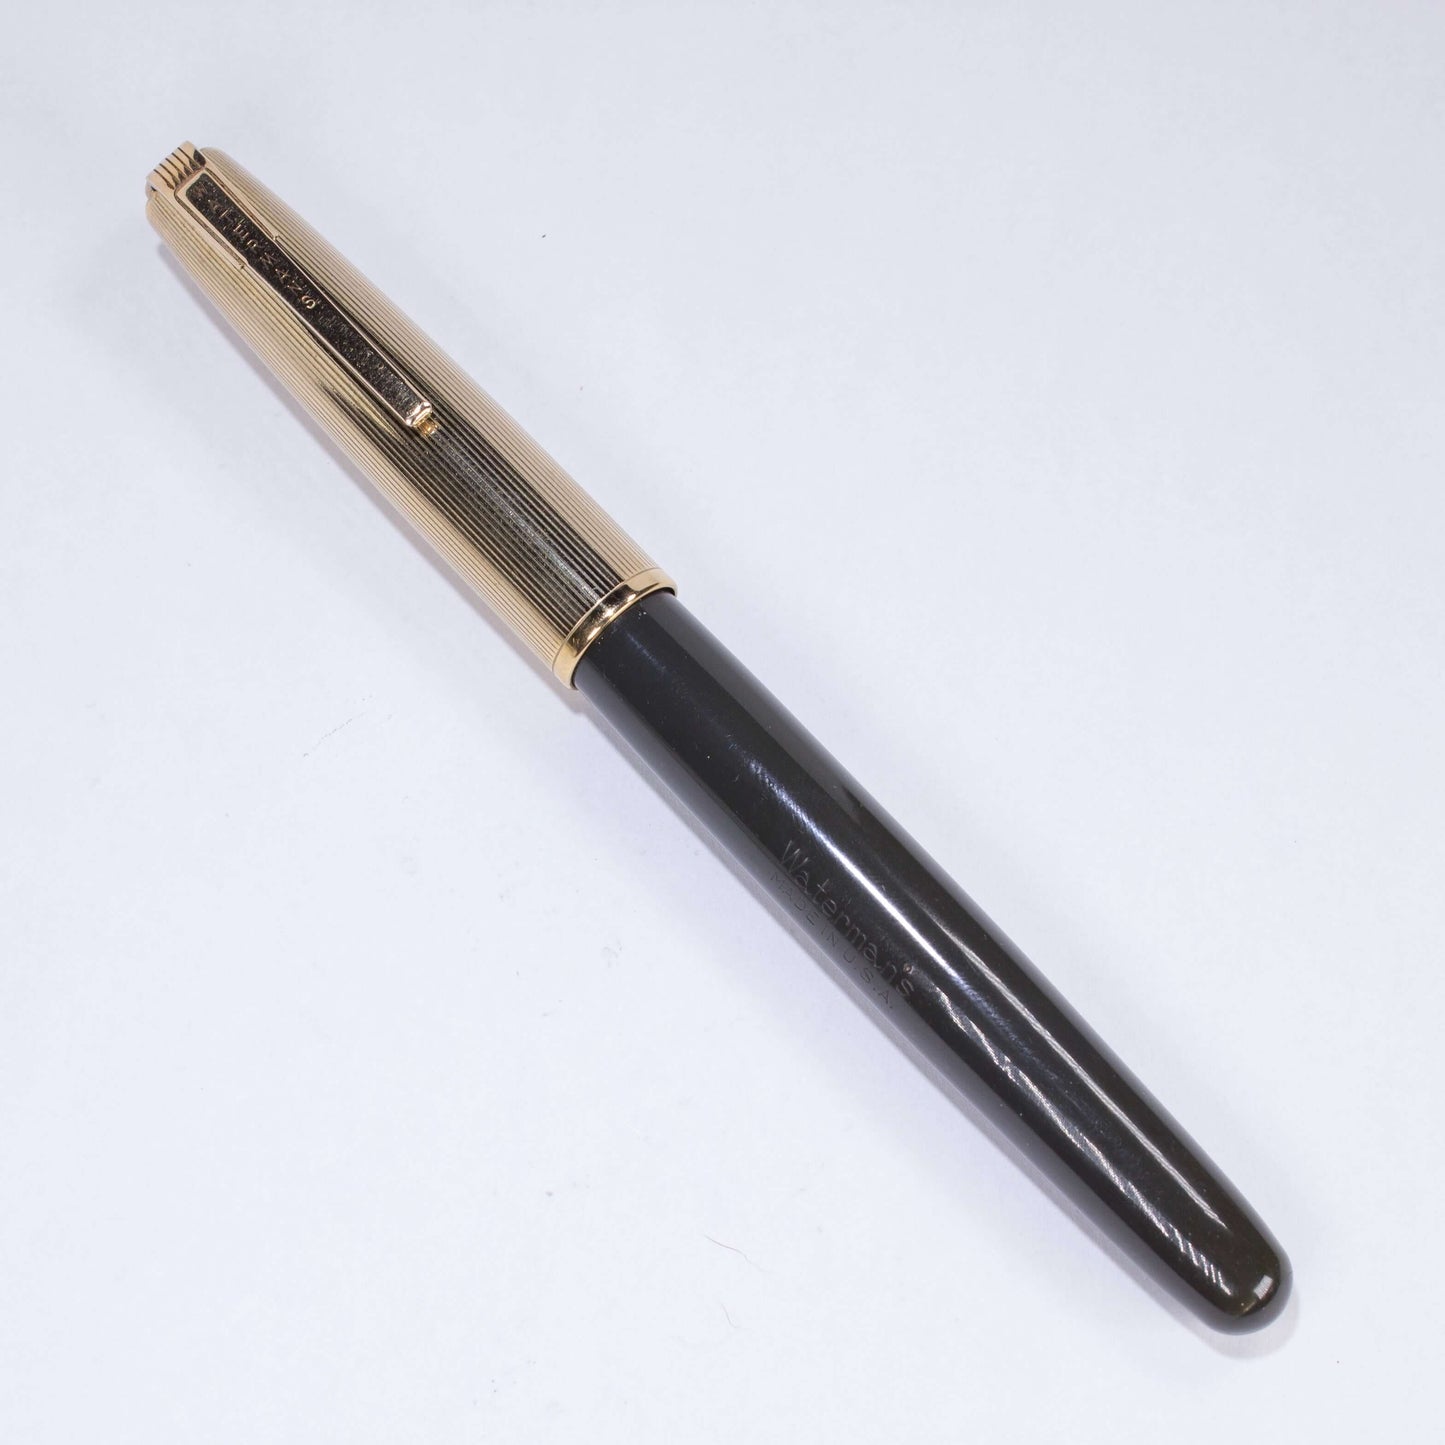 ${titleName/Type: Waterman Corinth Fountain Pen Manufacture Year: Late 1940s Length: 5 1/4 Filling System: Lever filler with new sac Color/Pattern: Grey barrel with gold filled cap Nib Type/Condition and remarks: 14K Fine Ridged Waterman nib Condition: ﻿